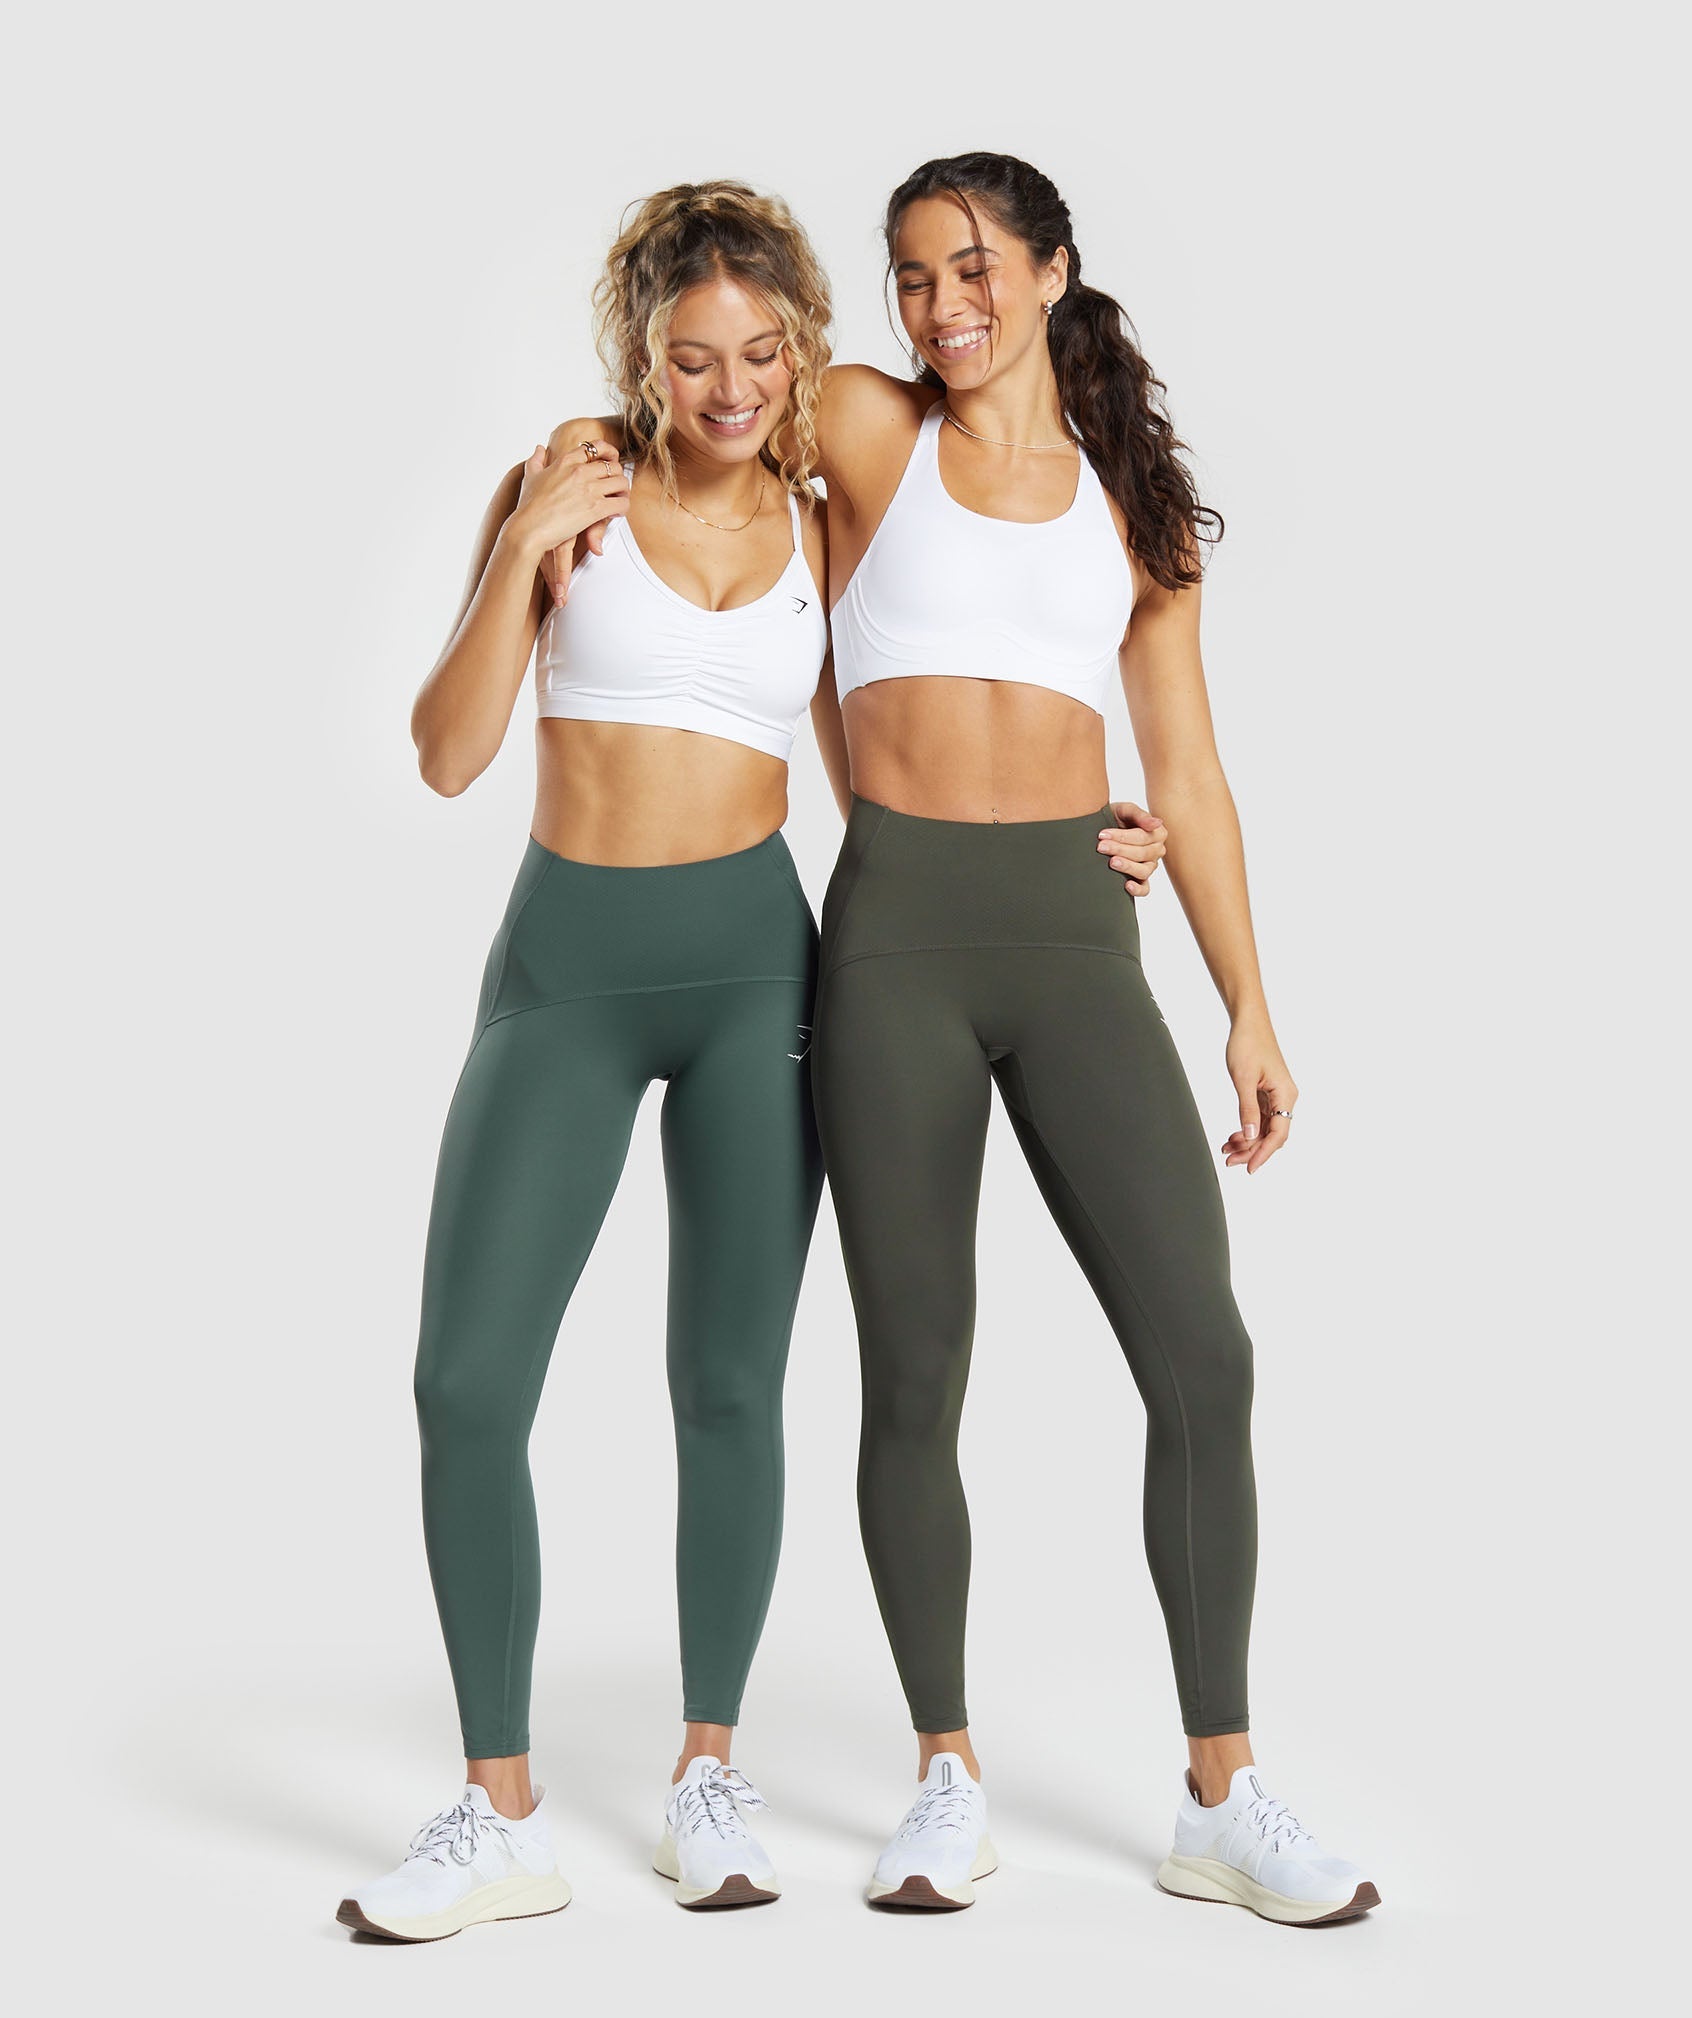 Waist Support Leggings in Strength Green - view 4